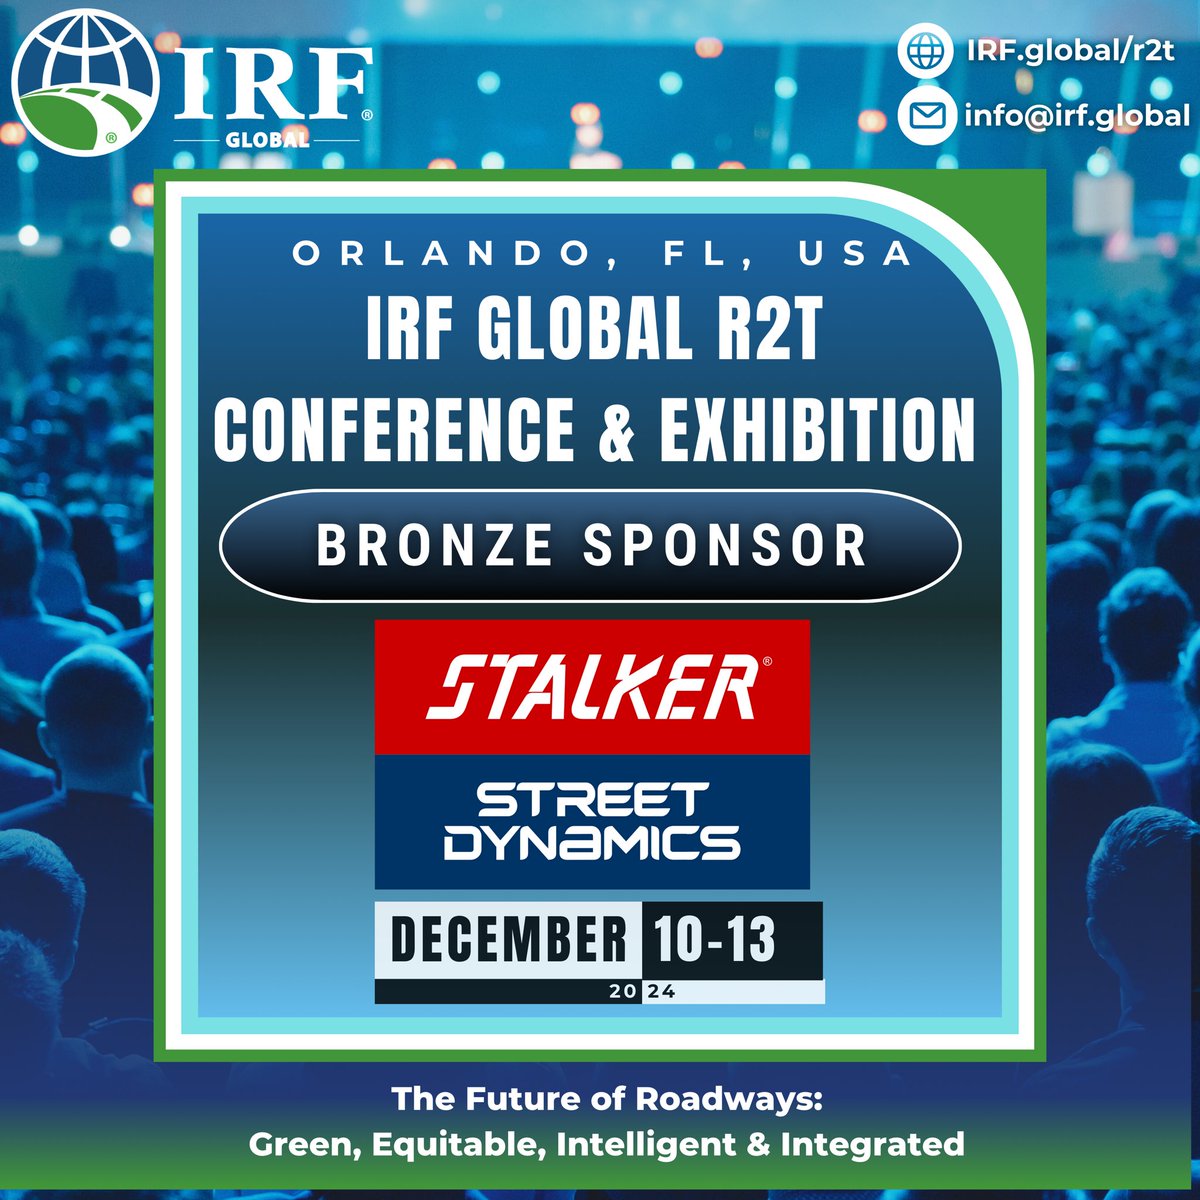 We are excited to announce @StreetDynamics_ as our Bronze  Sponsor for the #IRFGlobal #IRFR2T24 Conference. Do not miss the opportunity to take place at this amazing event. Please visit IRF.global/r2t and register for the year’s biggest #event.

#ConferenceSponsorship…